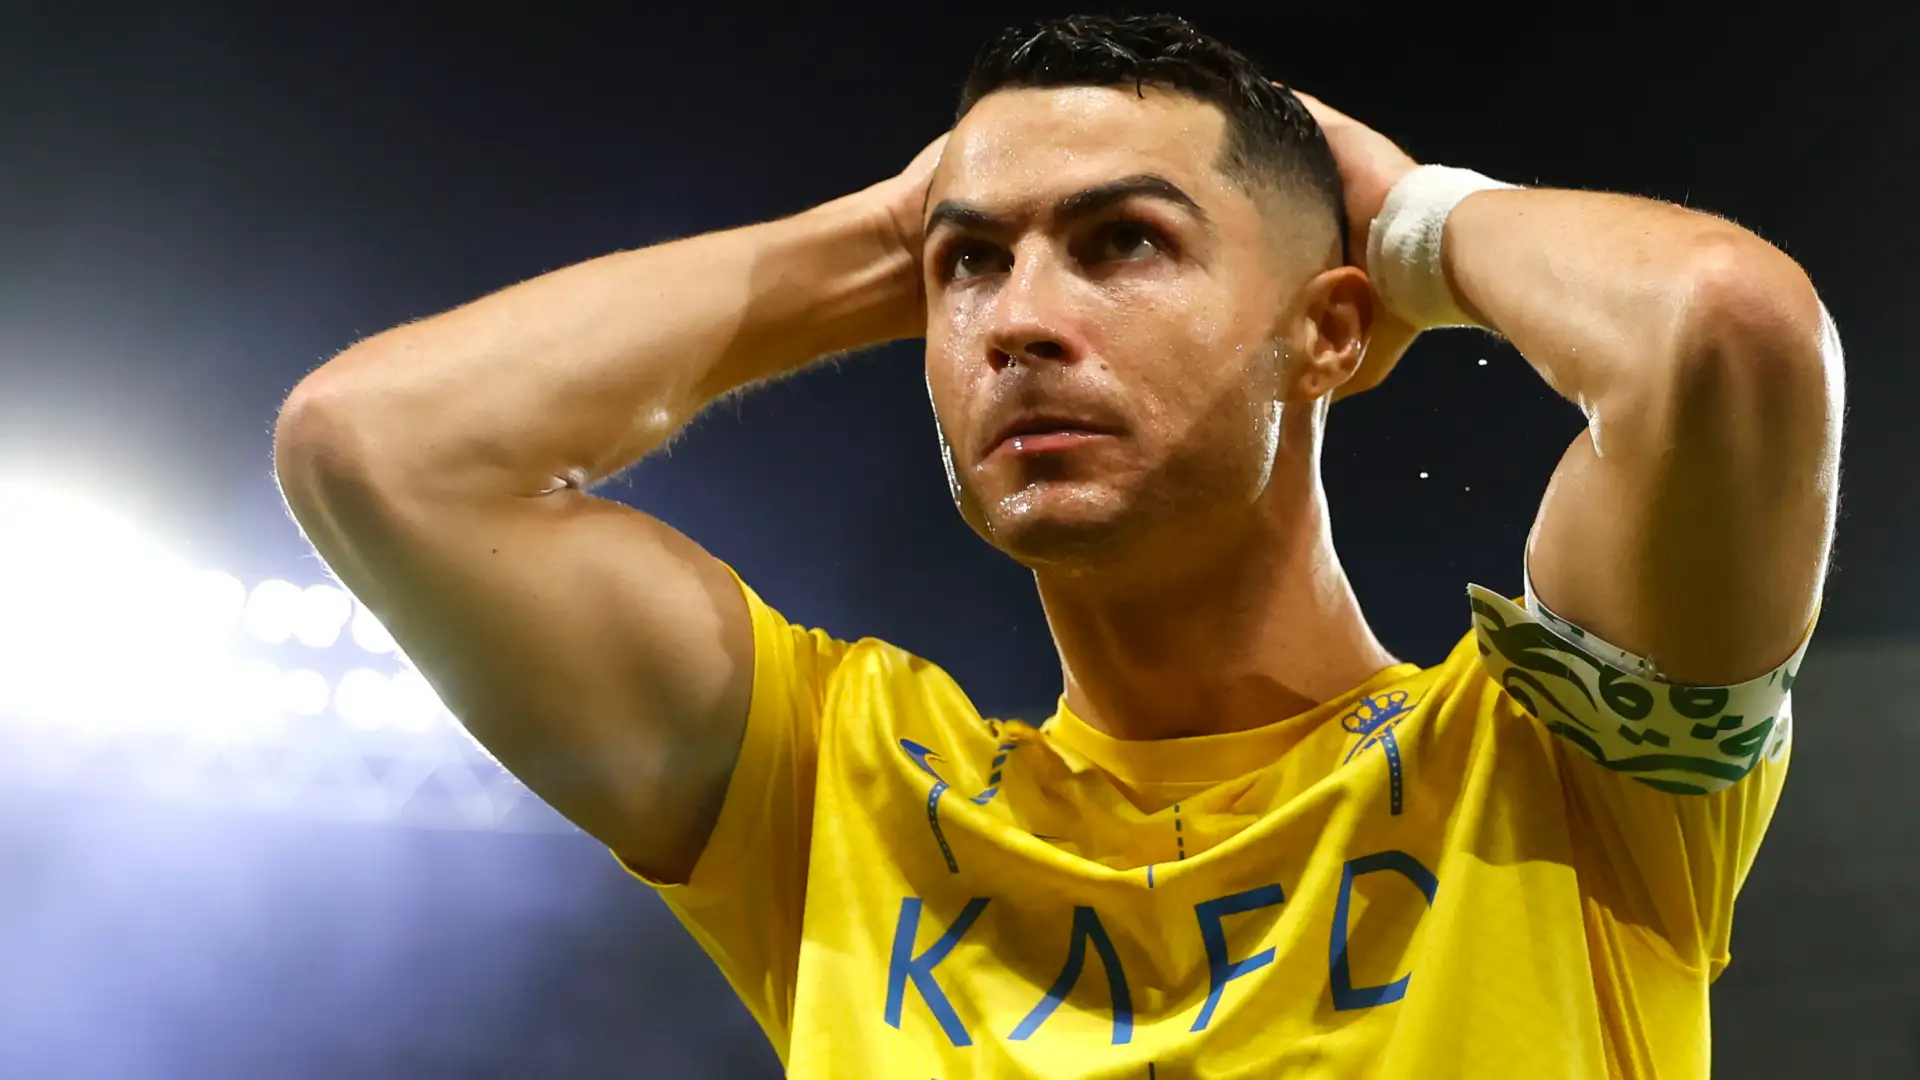 Cristiano Ronaldo explains why retirement remains some way off as 891-goal Al-Nassr & Portugal superstar roars back at ‘young lions’